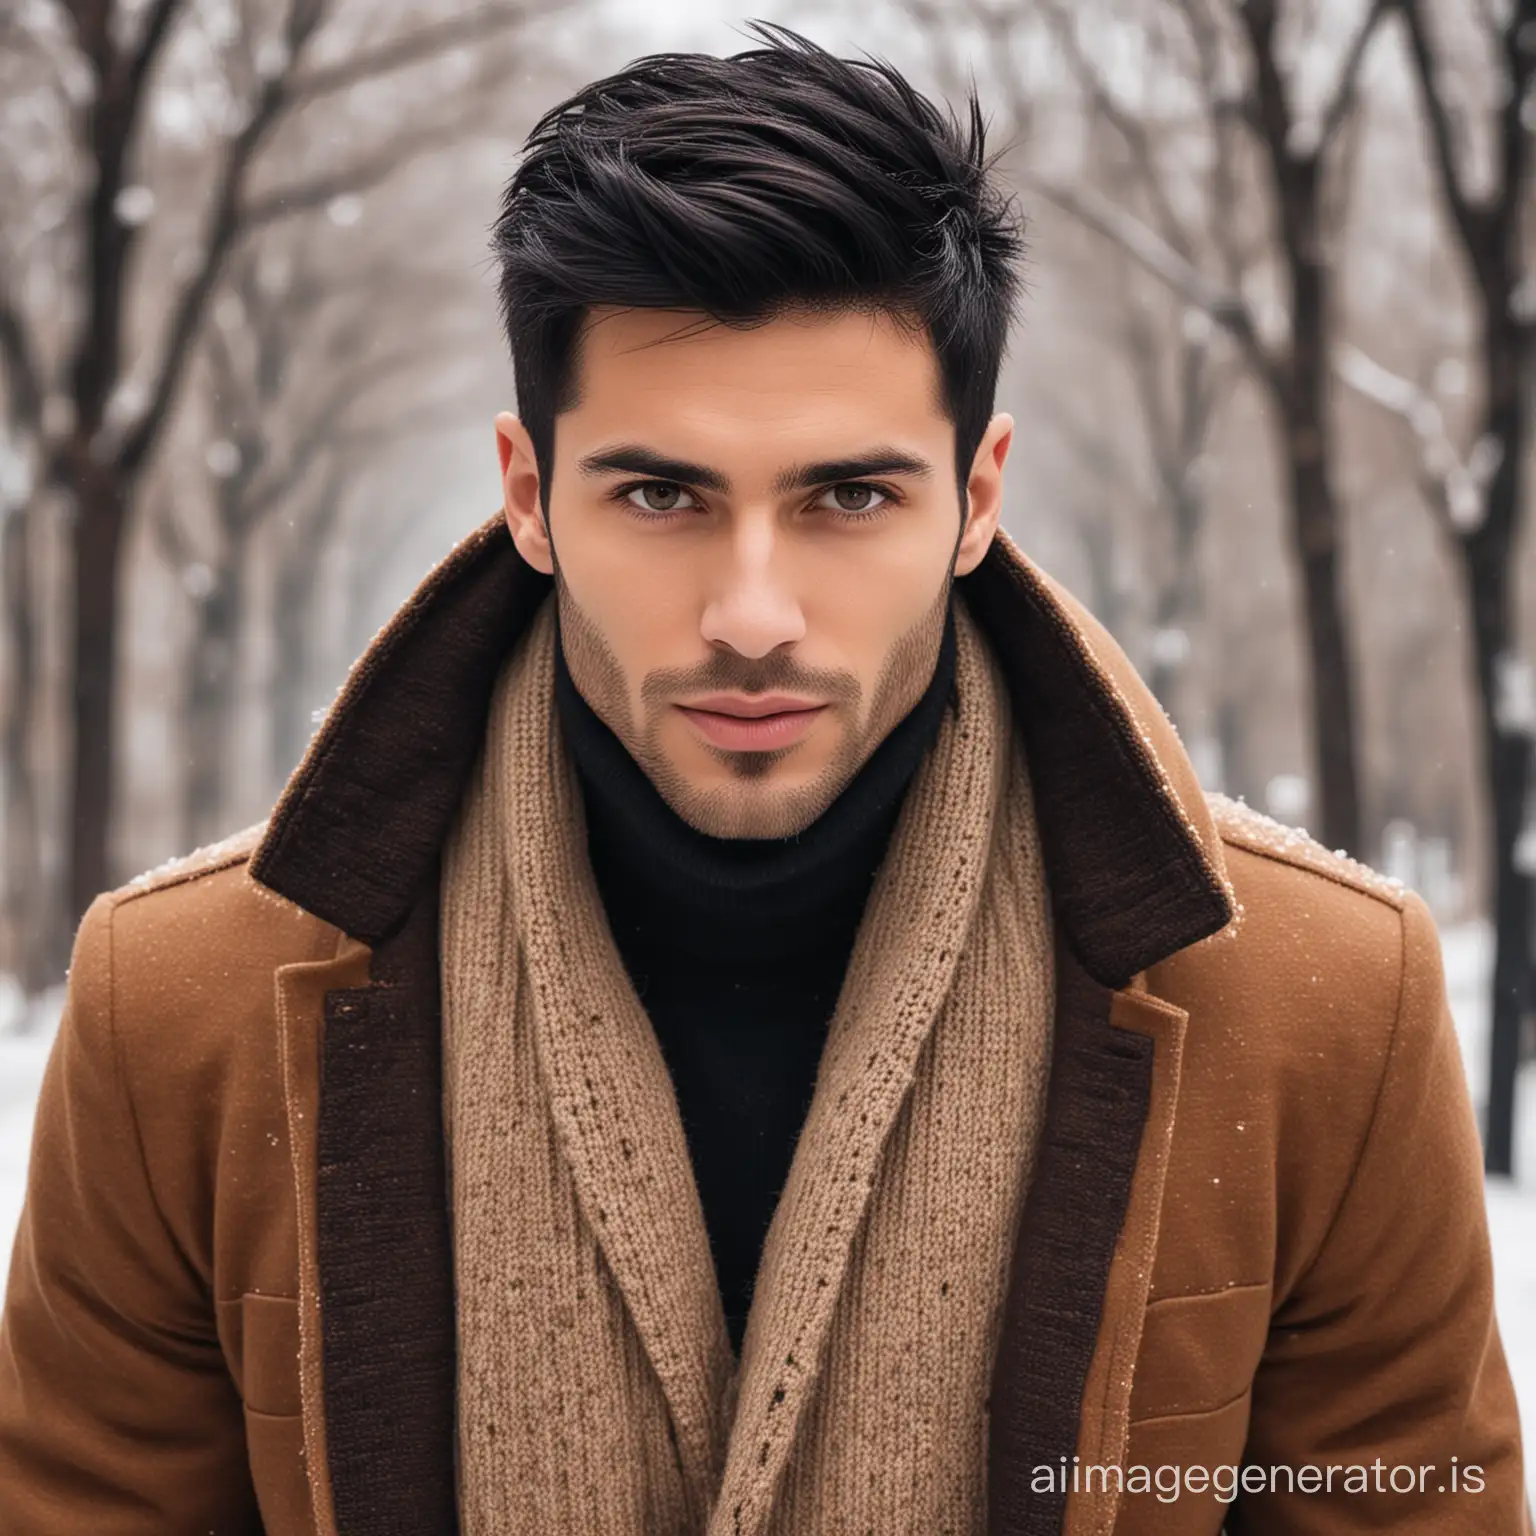 Fashionable-Man-with-Sleek-Black-Hair-and-Brown-Coat-in-Winter